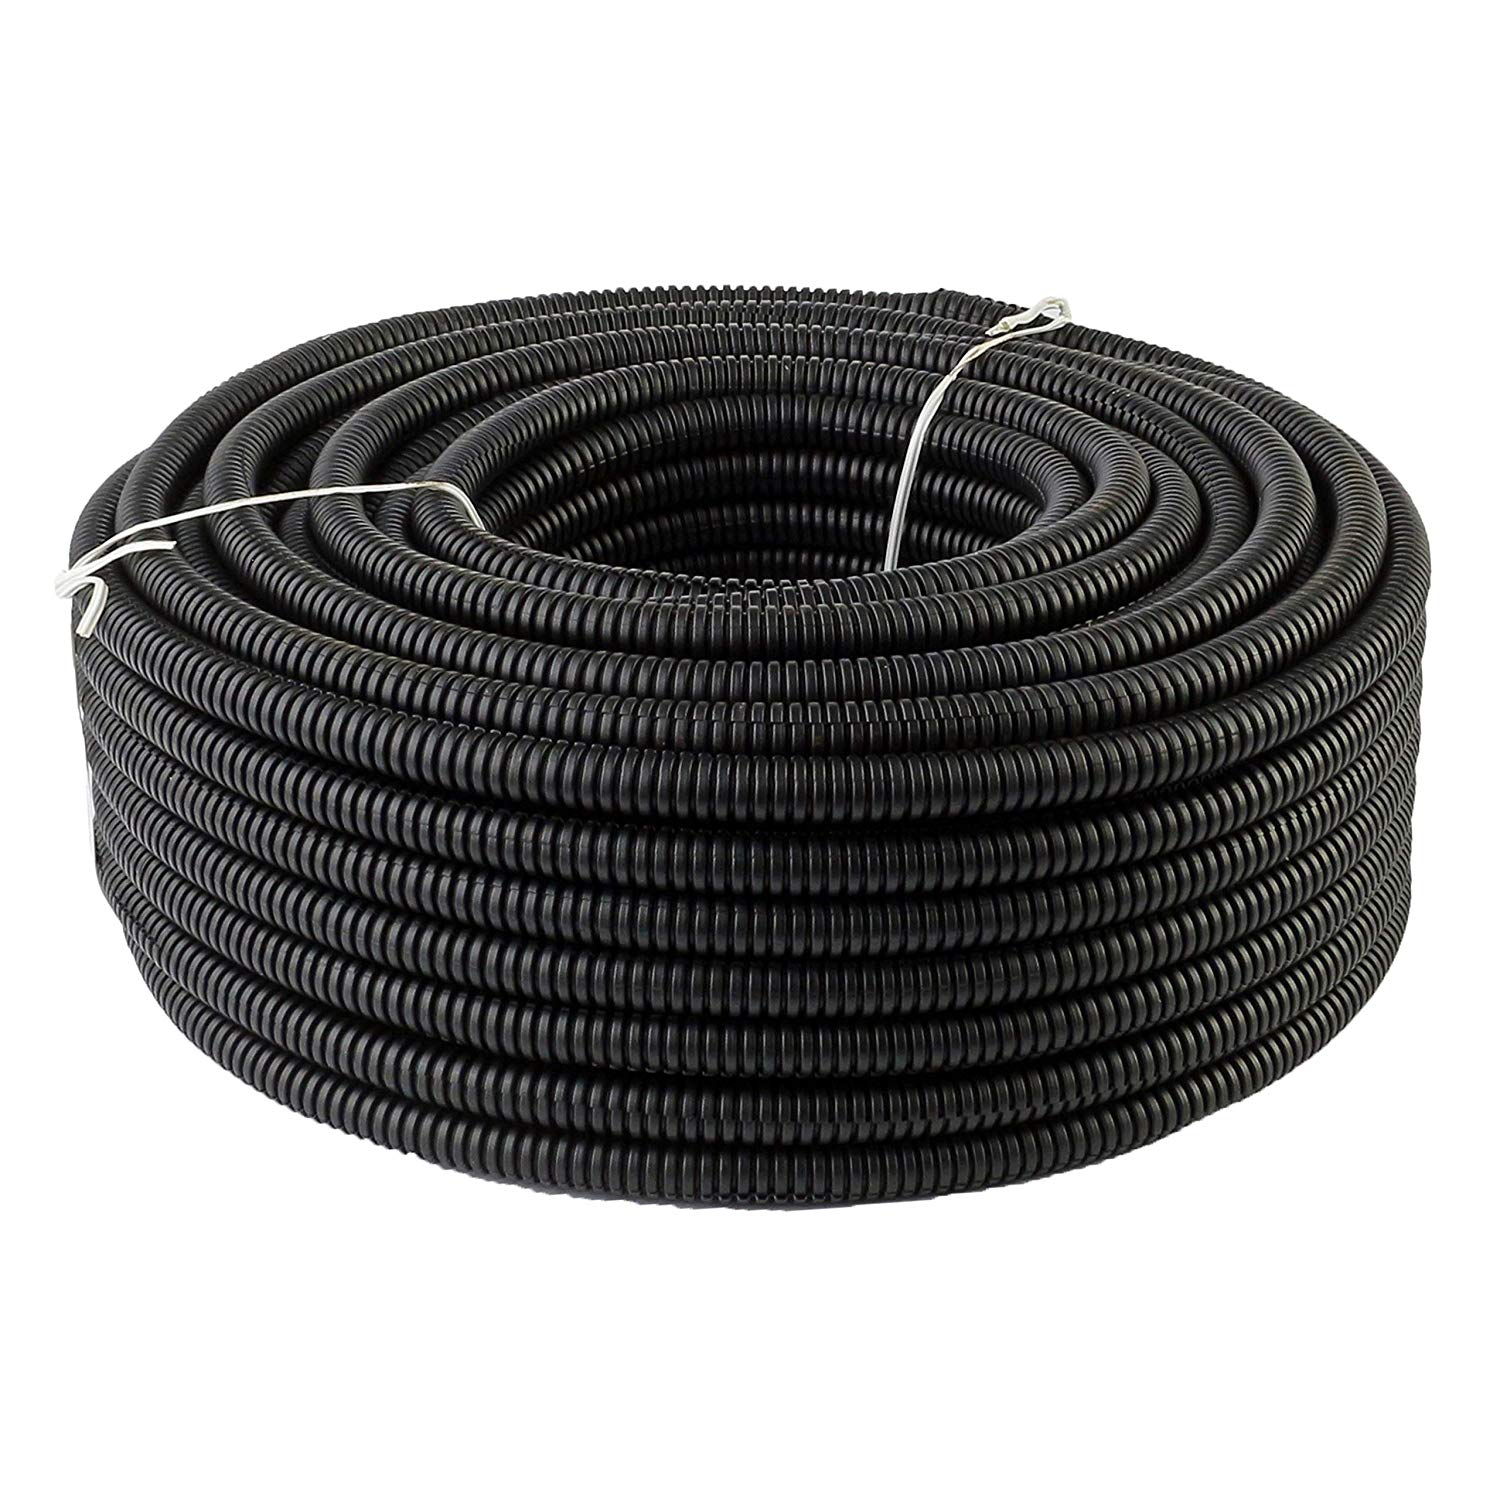 American Terminal Cable Management Cord Cover 100 Ft x 1/4" Cable Protector Split Loom Tube Polyethylene Cord Protector Black Cable Sleeve Wire Management Cable Cover Wire Wrap Cord Sleeve Super-Deals-Shop